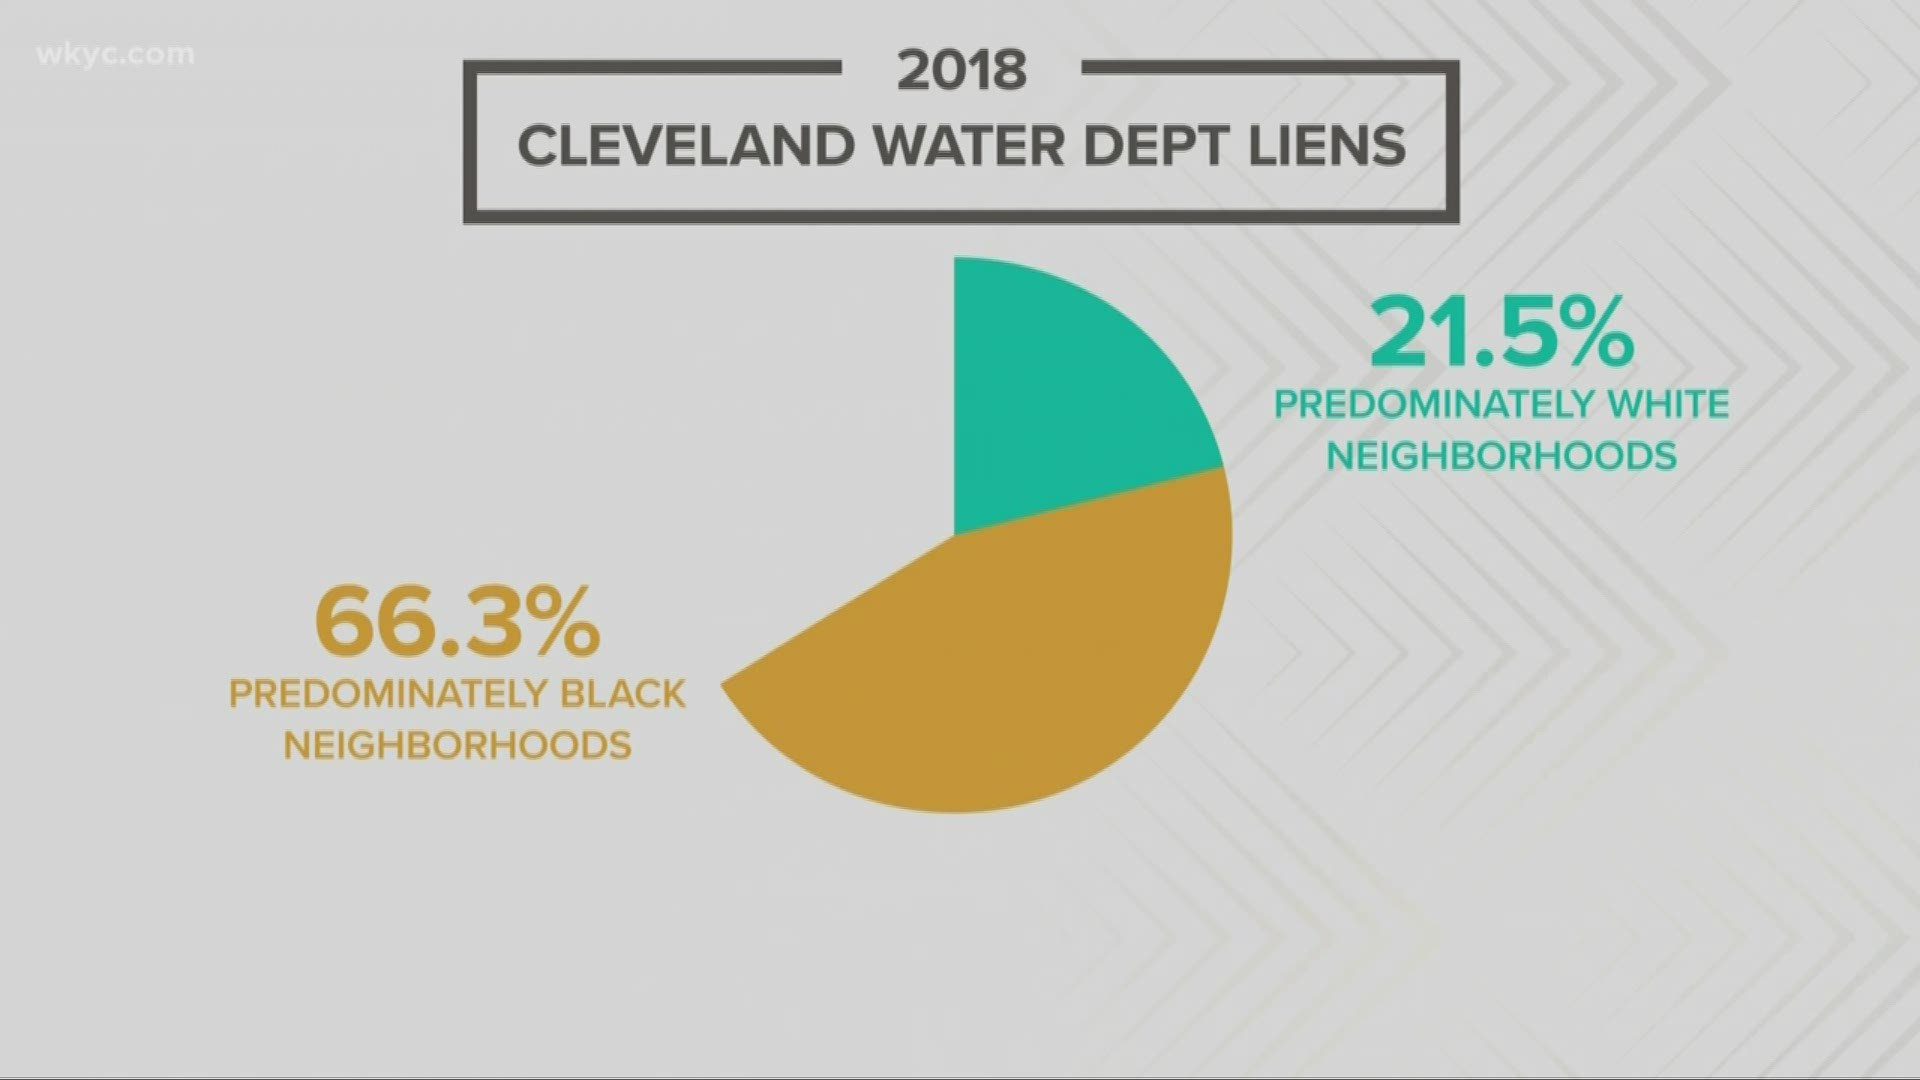 The NAACP says the city shuts off water service for unpaid bills in predominately black neighborhoods more often than in white neighborhoods. Mary Naymik reports.